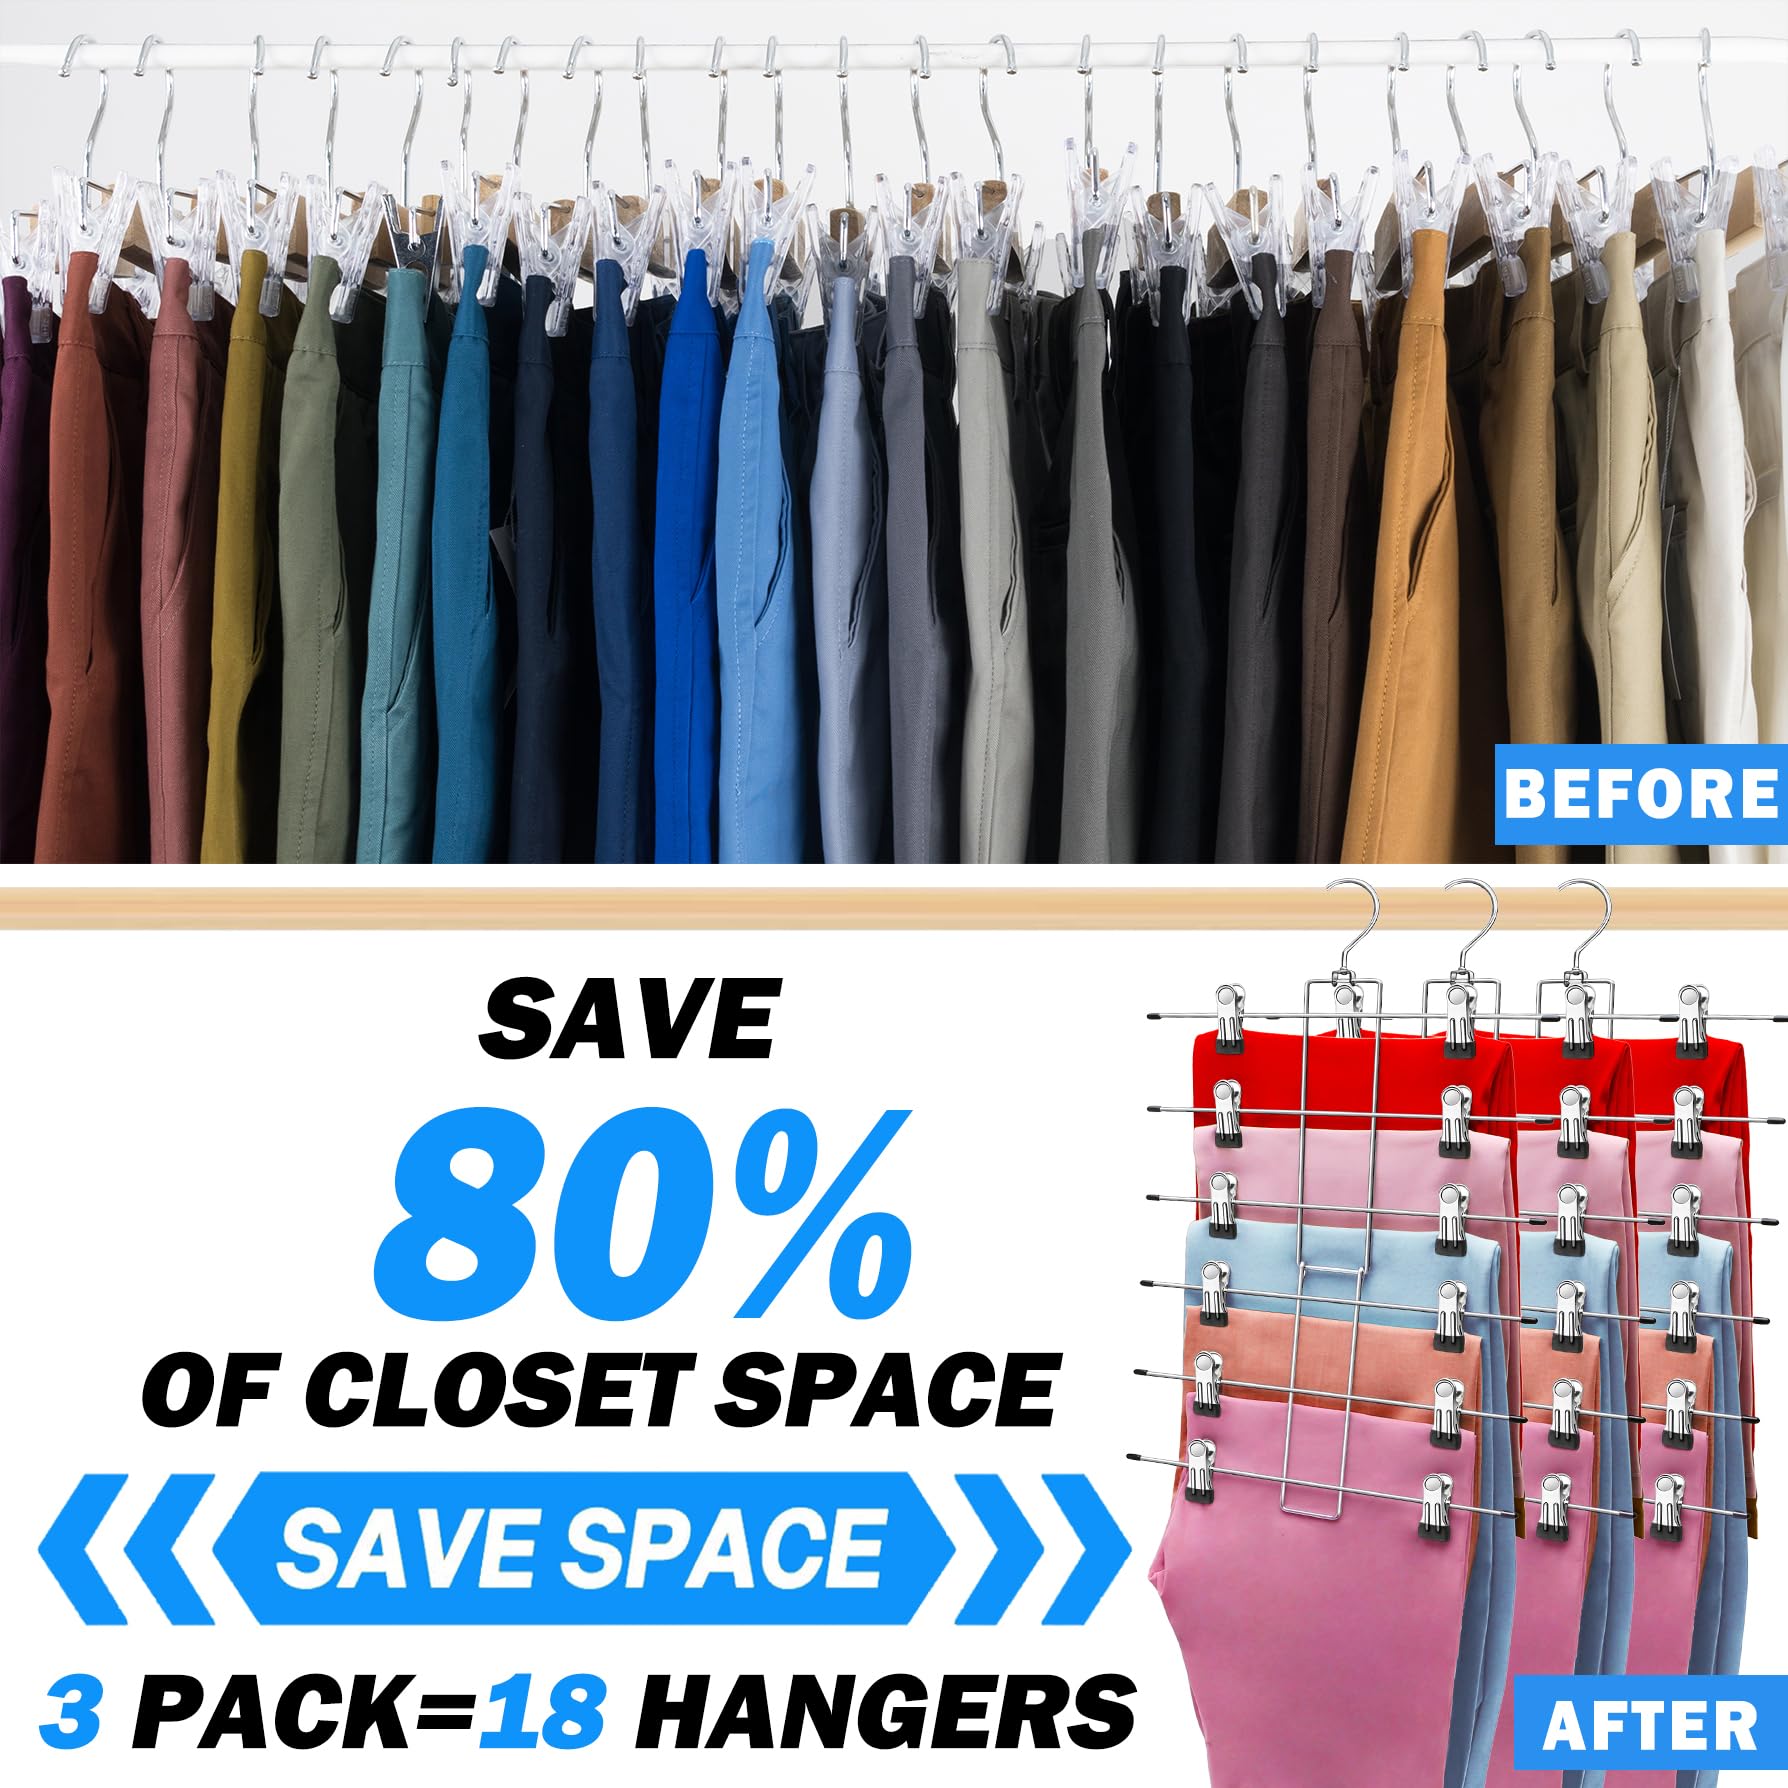 3 Pack Closet-Organizer-Pants-Hangers-Space-Saving,Metal Closet-Organizers-and-Storage,6 Tier Organization and Storage Short Skirt Hangers Cilp,Dorm Room Essentials for College Students Girls Boys Guy